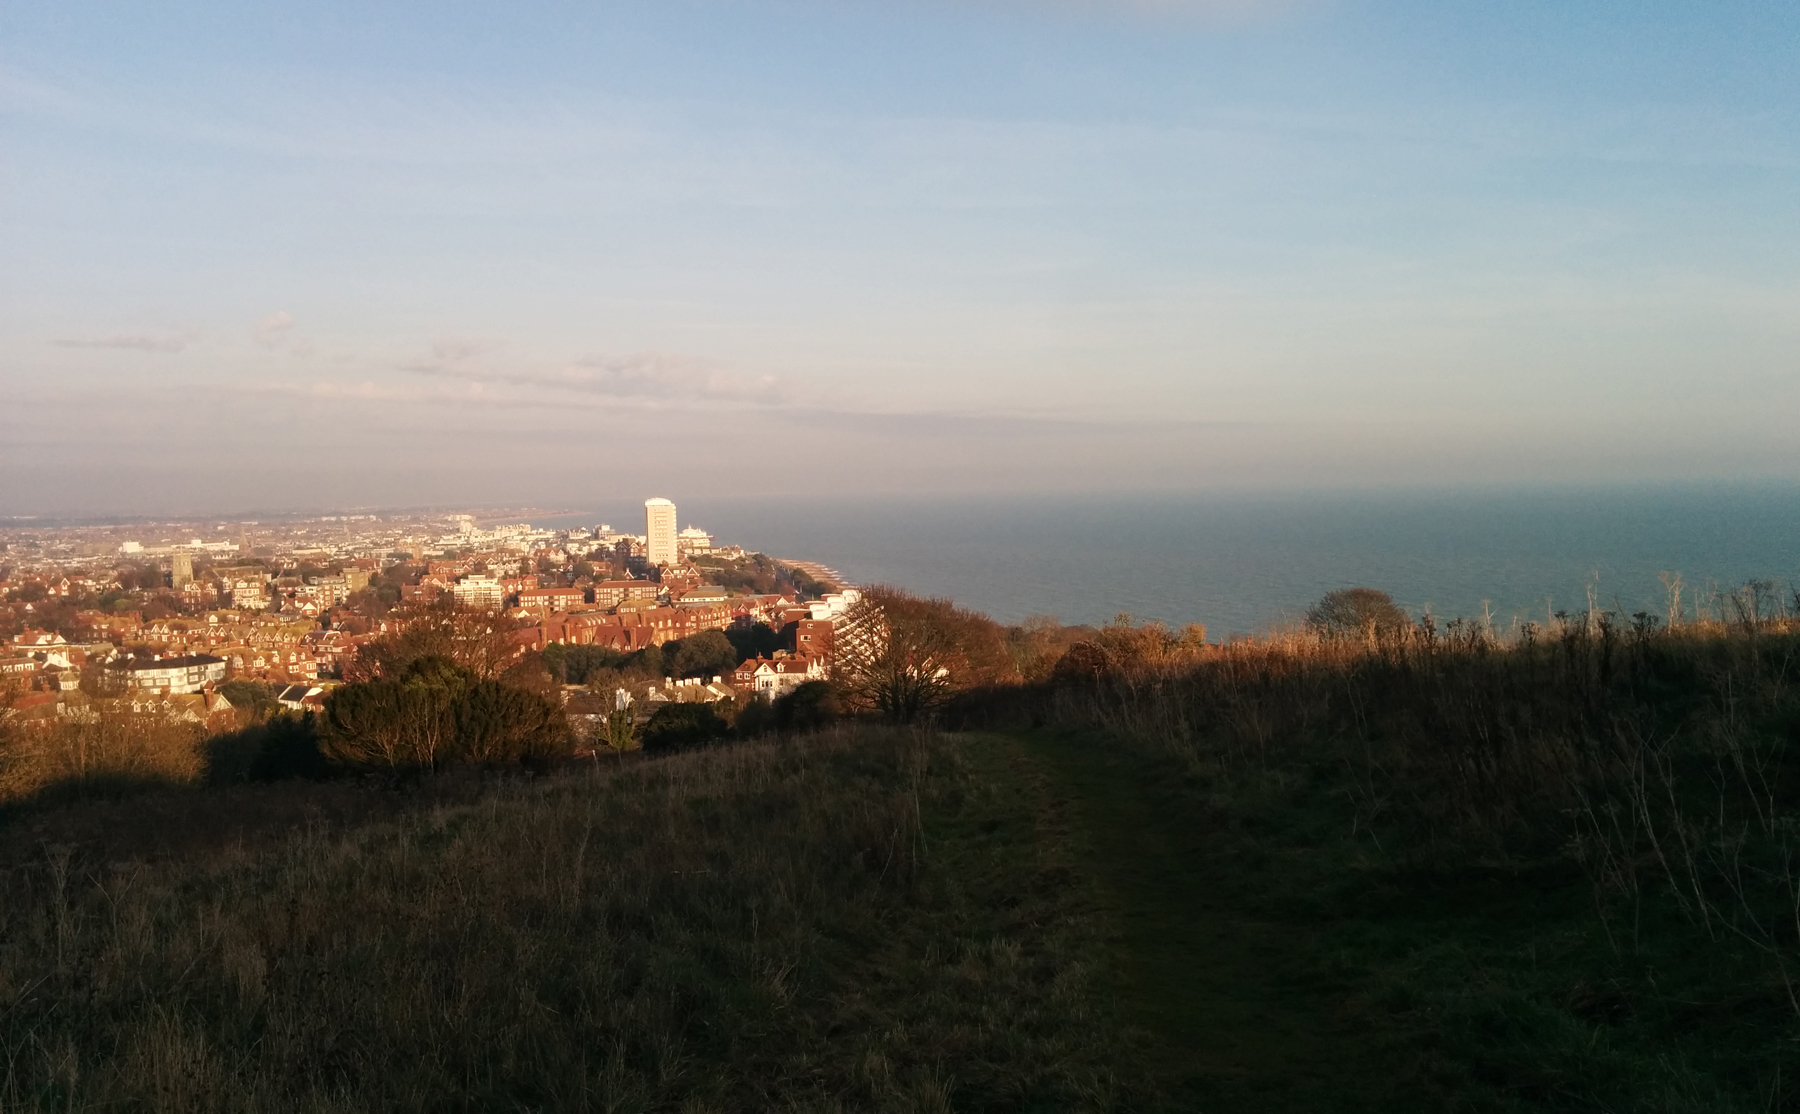 Looking back to Eastbourne from the footpath